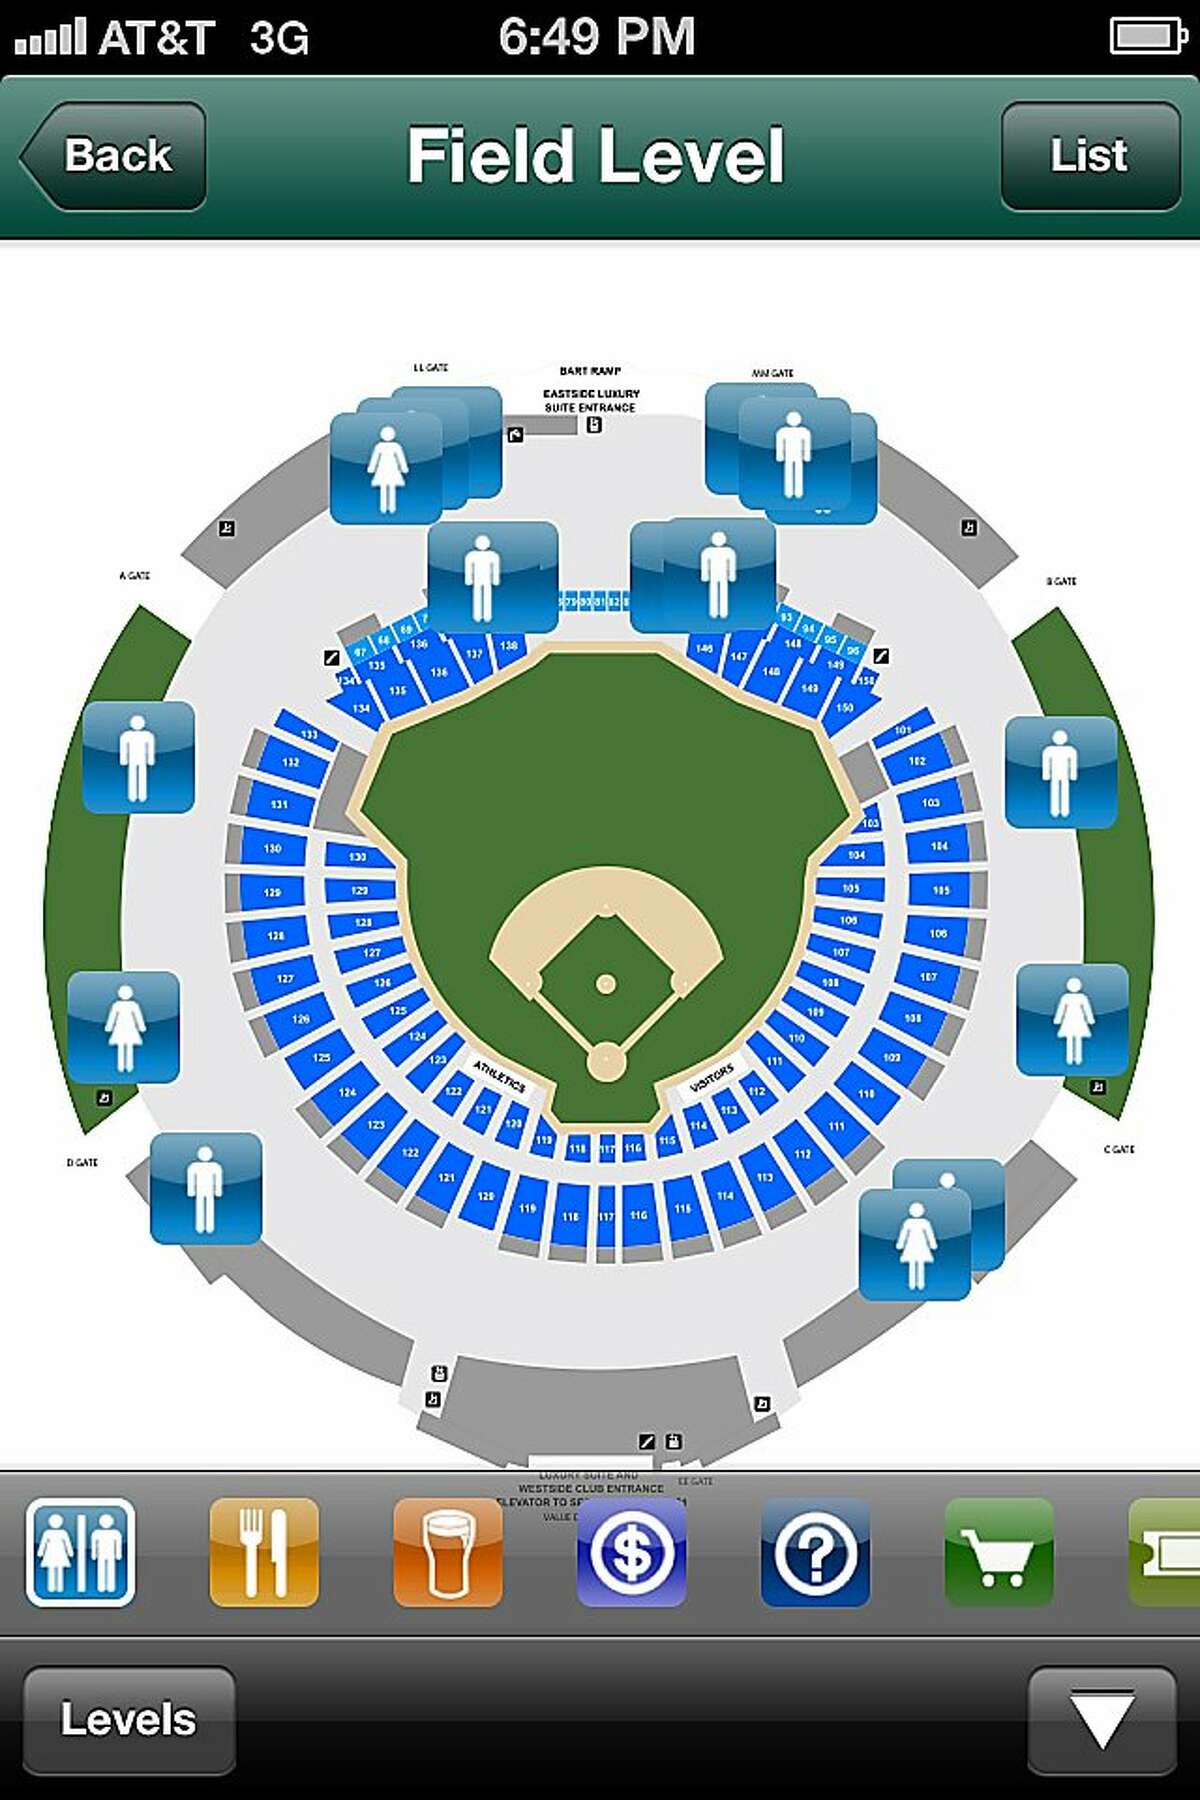 The Mobil Seat Upgrade app by Major League Baseball shows fans the locations of better available seats, which also cost more.